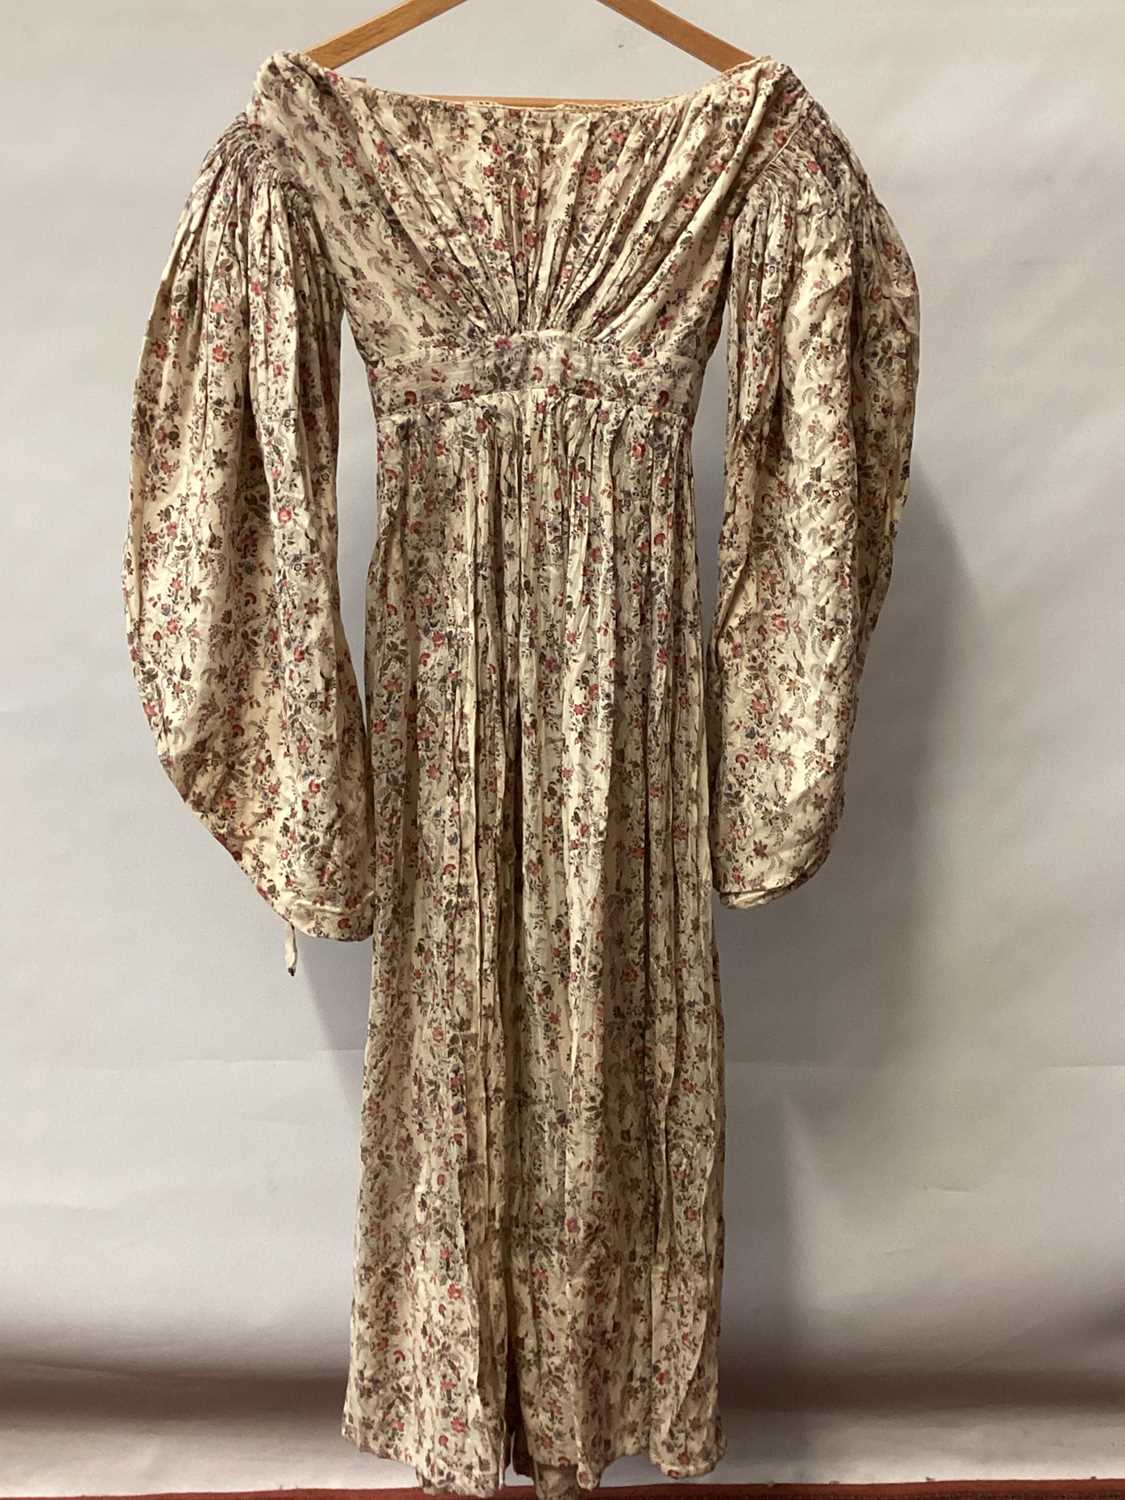 Lot 2110 - 1837 Victorian maternity day dress in Indian printed cotton, bodice has feeding openings with tiny button fastenings, large gigot sleeves, gathered bodice front and back and high waistline.